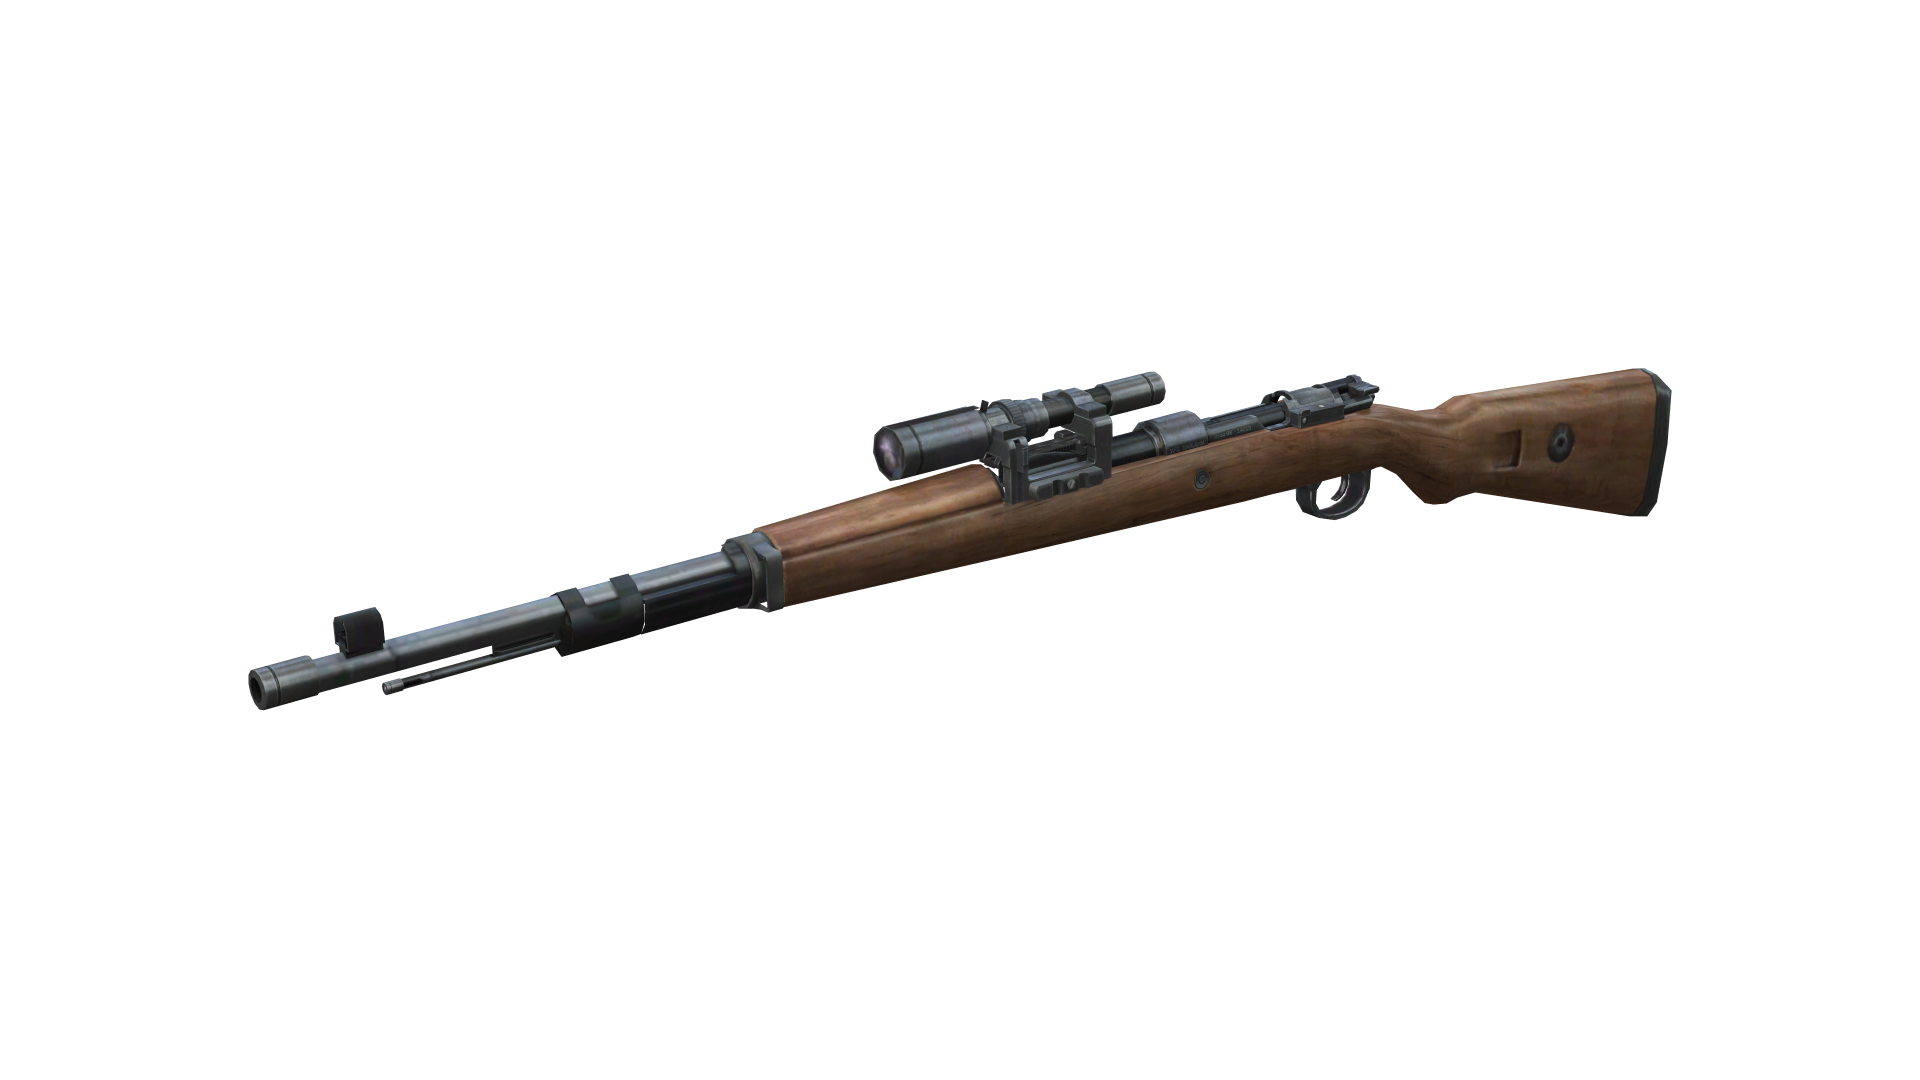 Sniper rifle PNG image free download